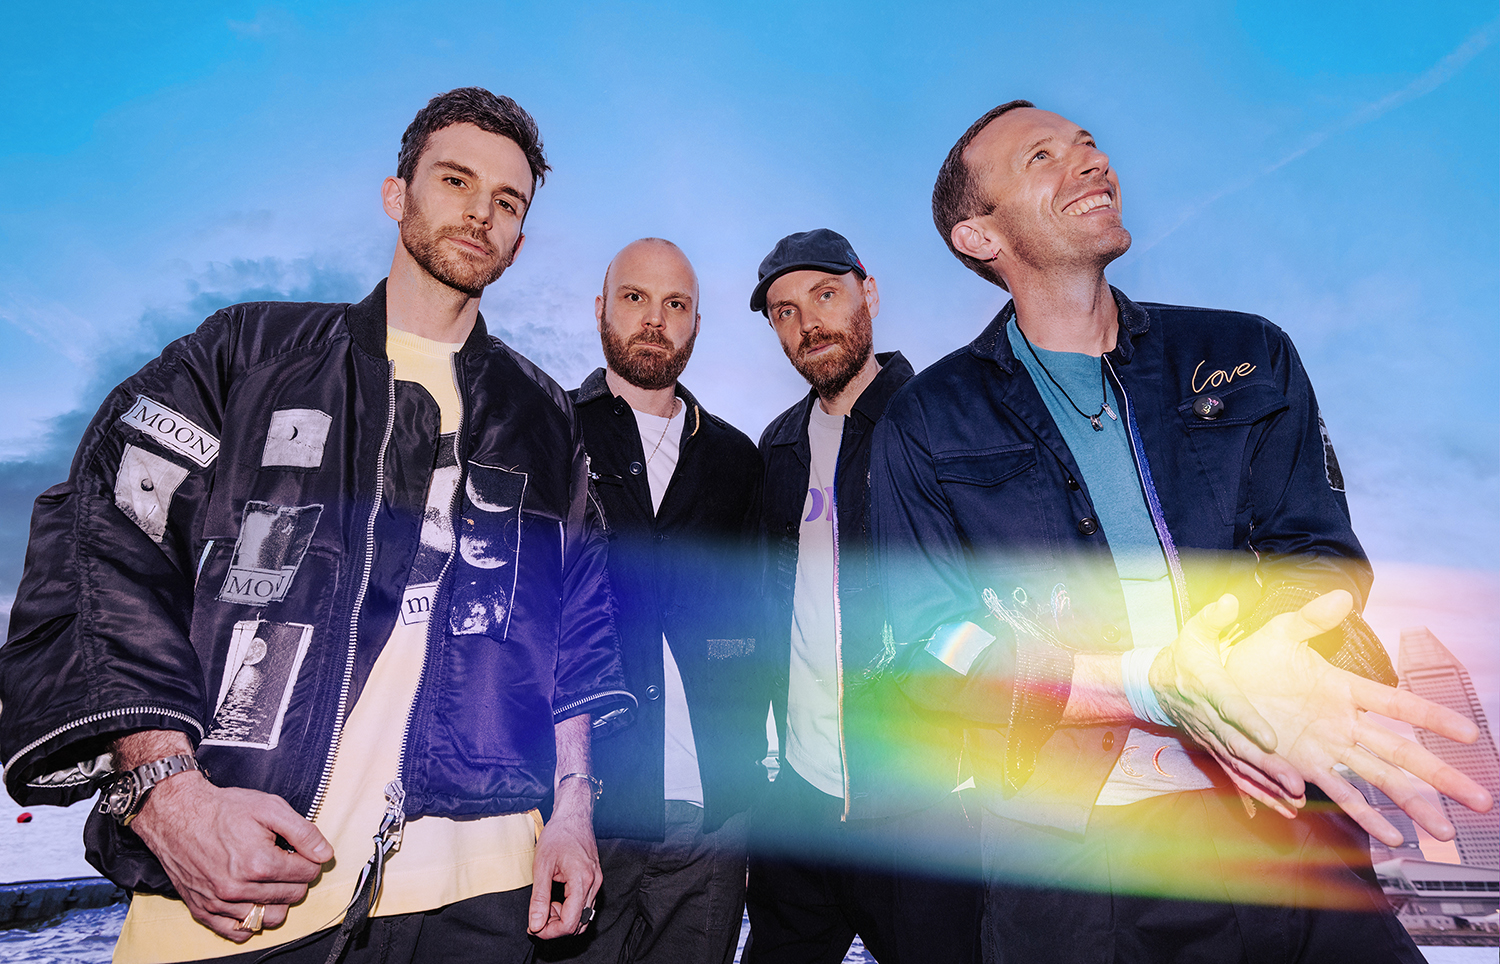 COLDPLAY ANNOUNCE ‘MOON MUSIC’ NEW ALBUM LANDING OCTOBER 4